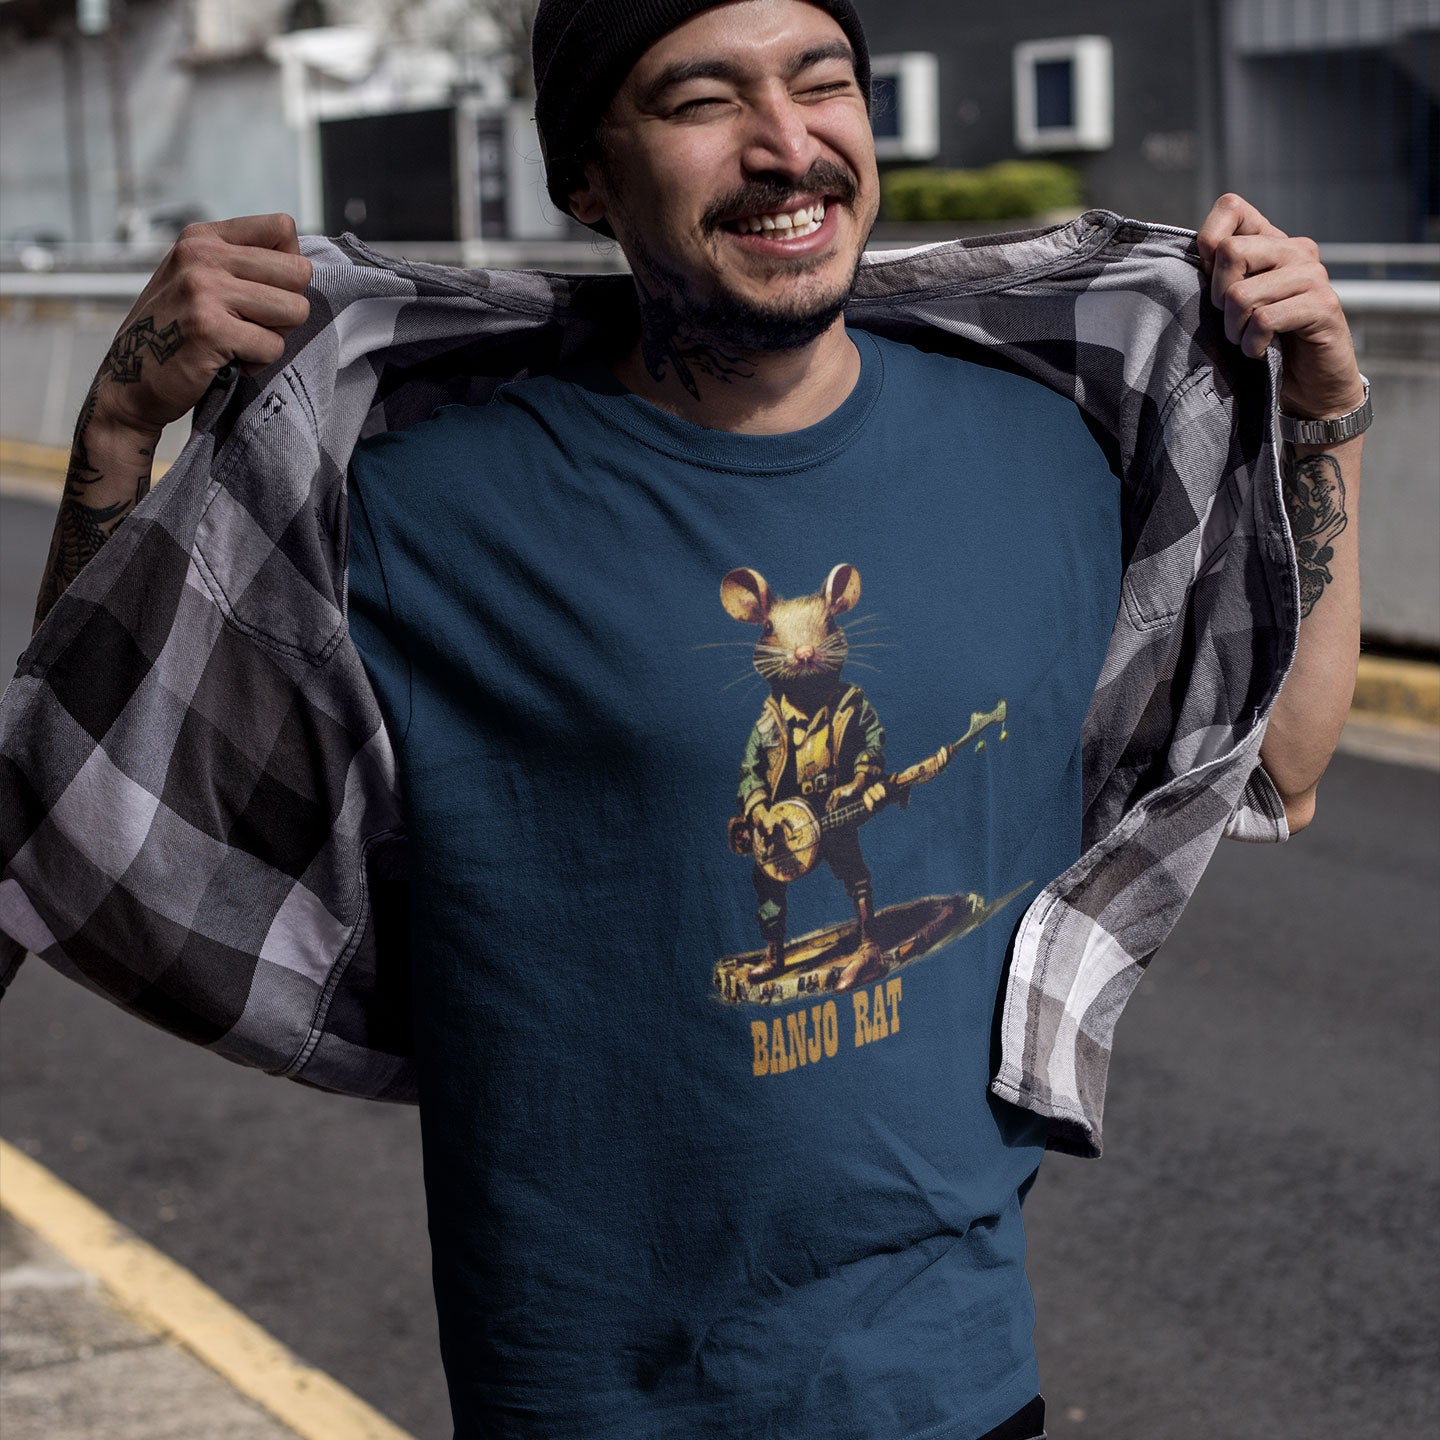 A guy wearing a navy t-shirt with a print of a rat playing the banjo print on the front